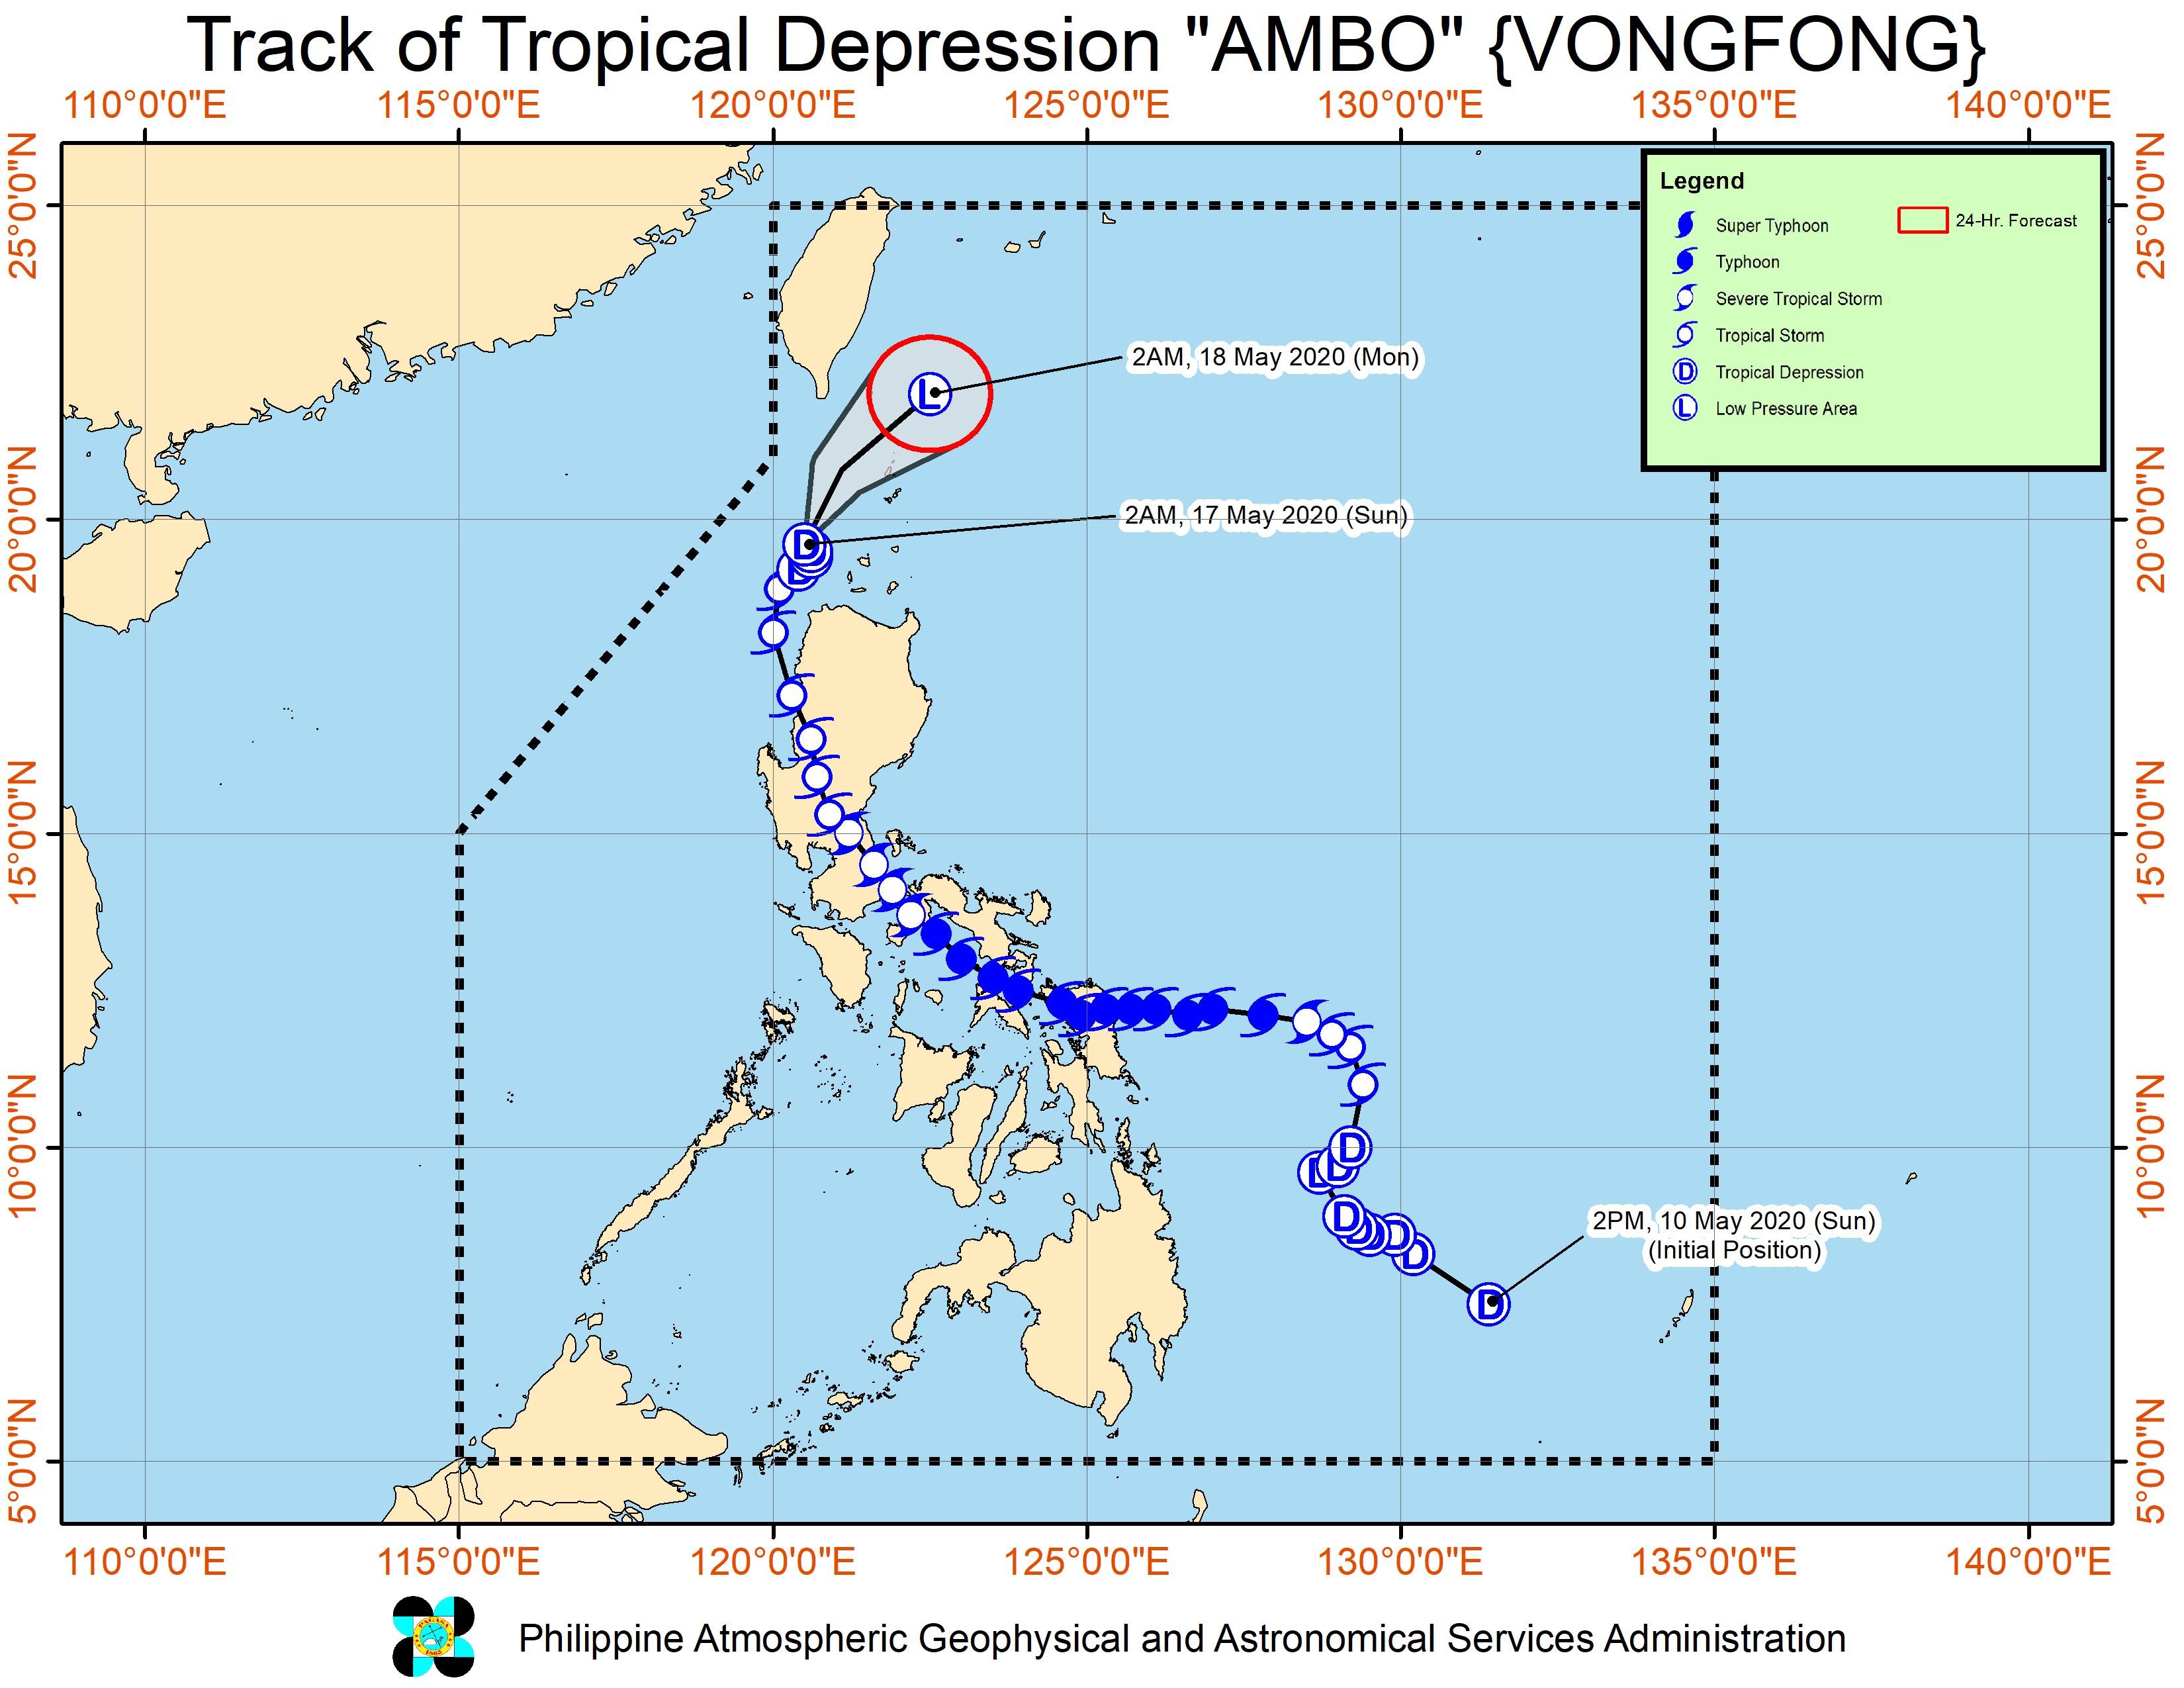 Forecast track of Tropical Depression Ambo (Vongfong) as of May 17, 2020, 5 am. Image from PAGASA 